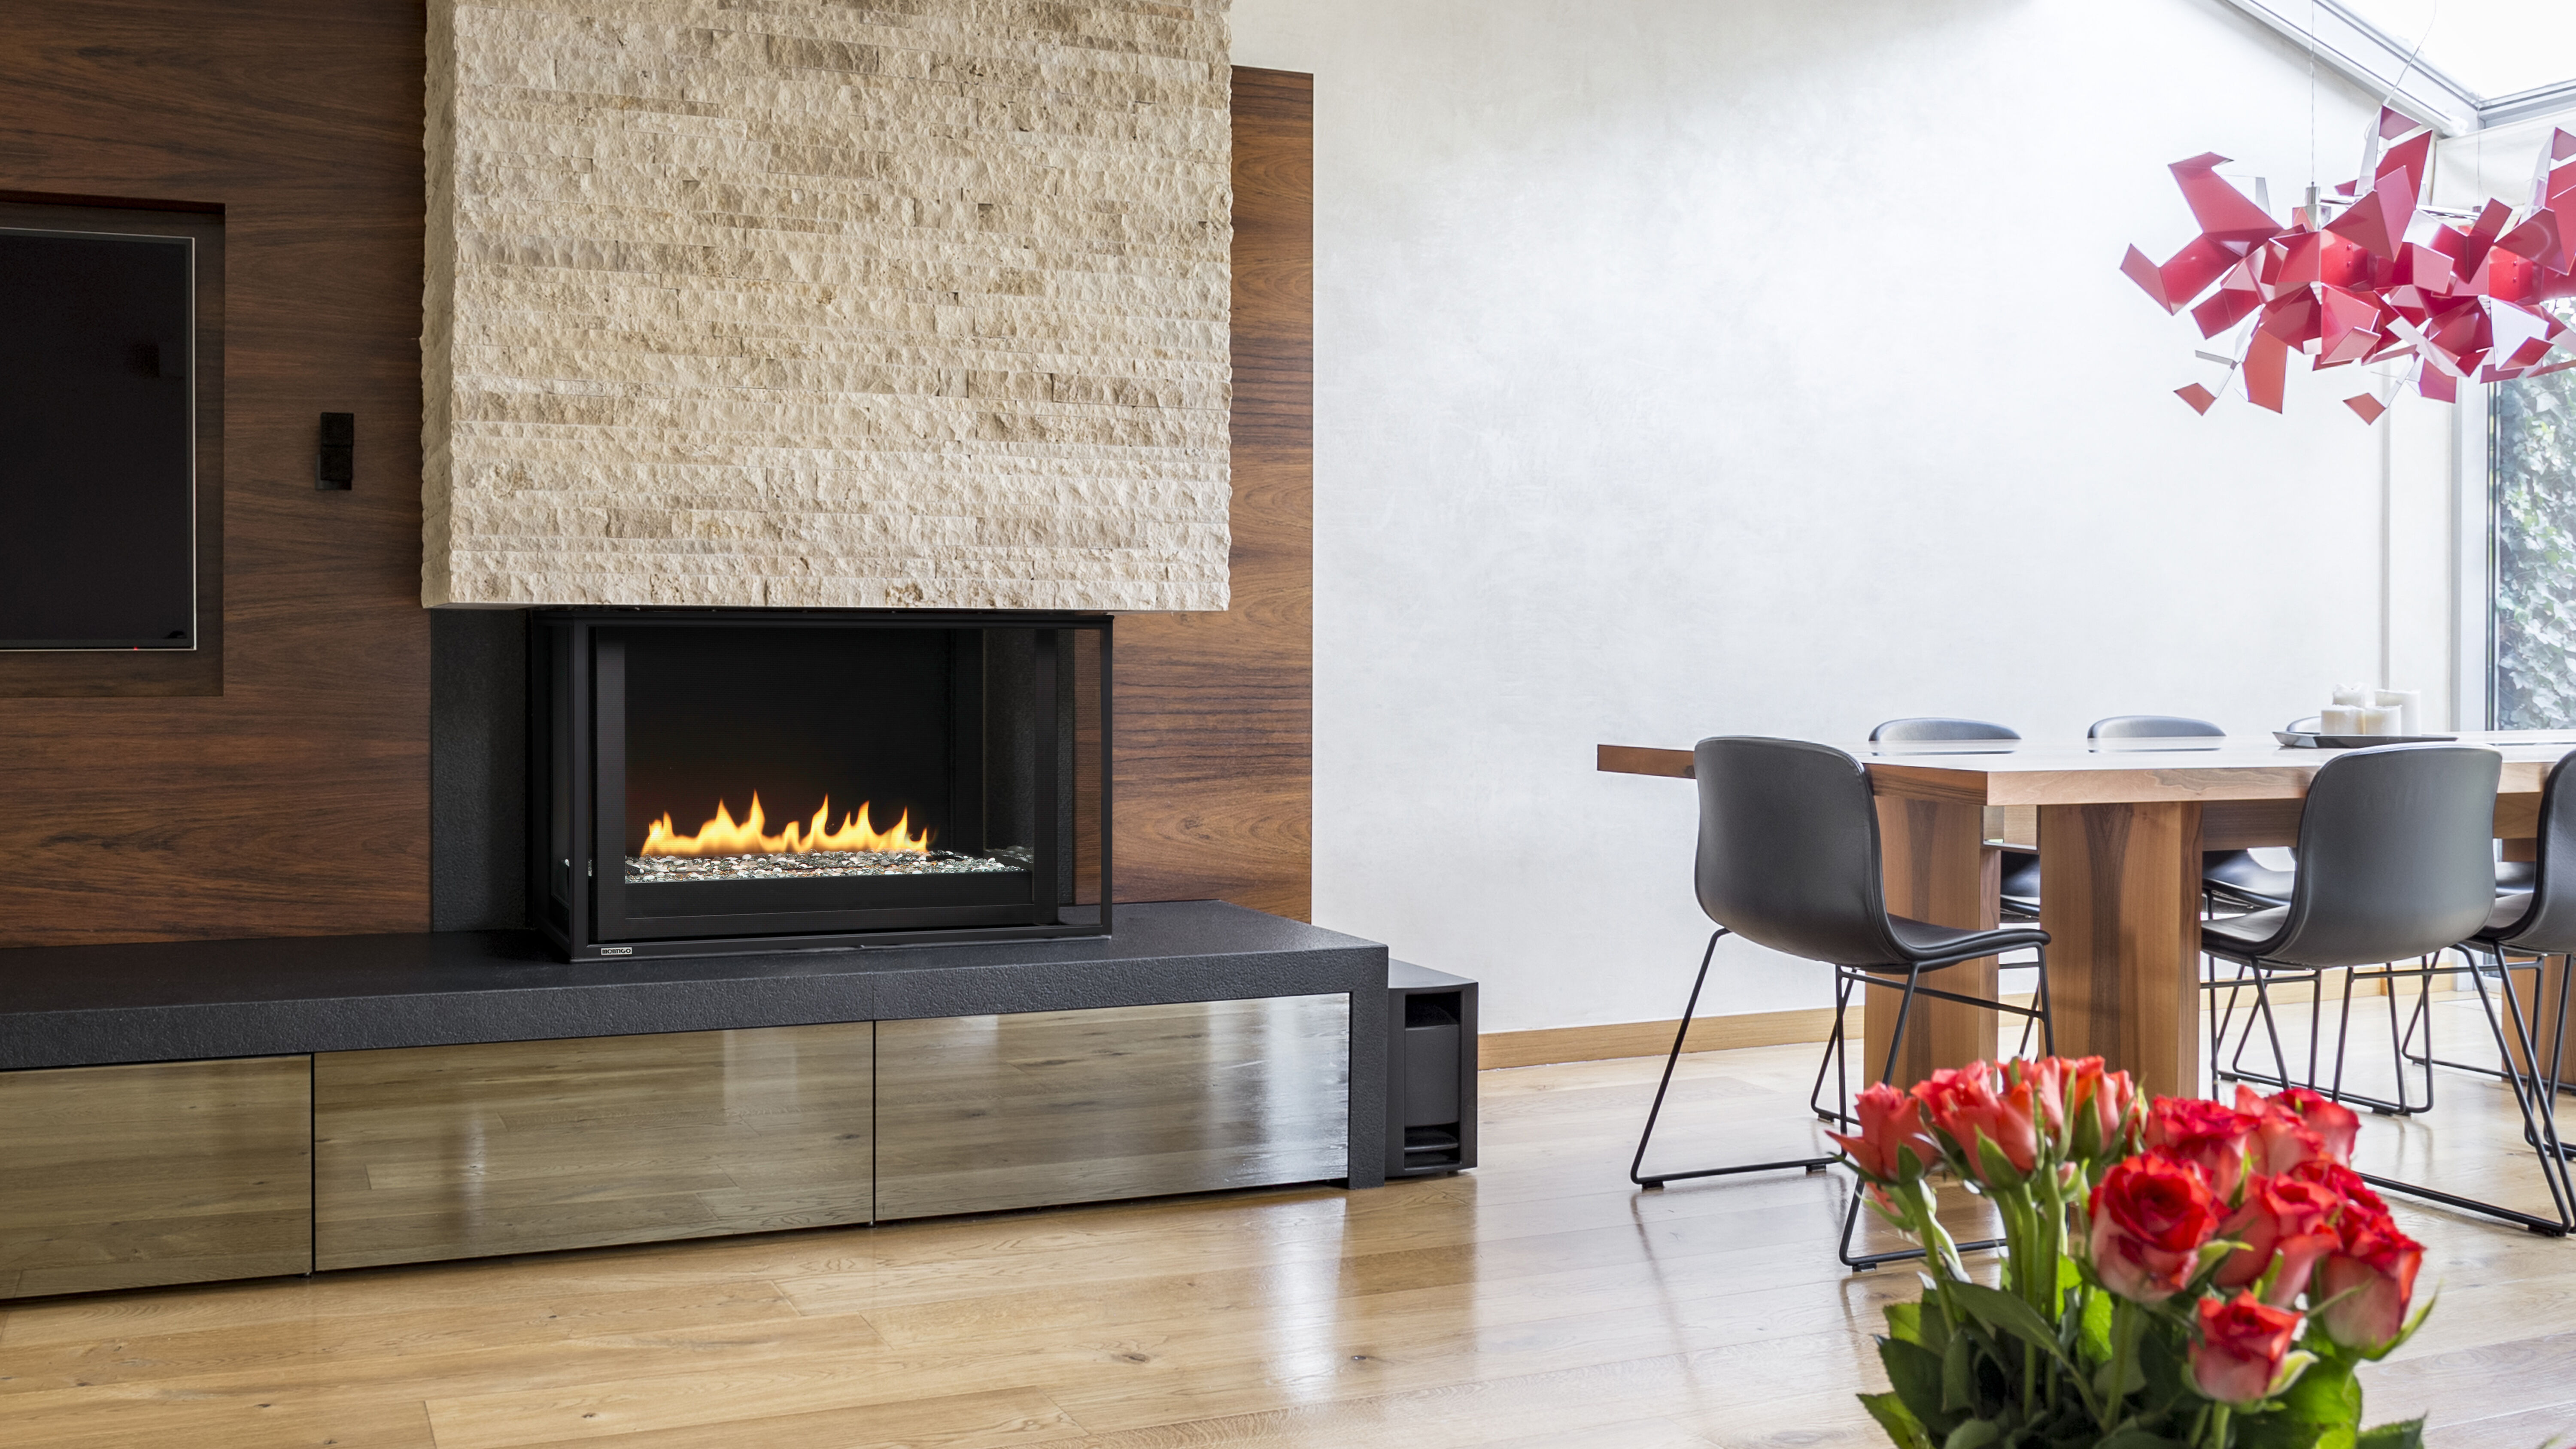 A modern, minimalistic living space with a large wooden dining table, eight black metal chairs, and a hearth finished with wooden planks, a natural stone mantel, and a linear gas fireplace.